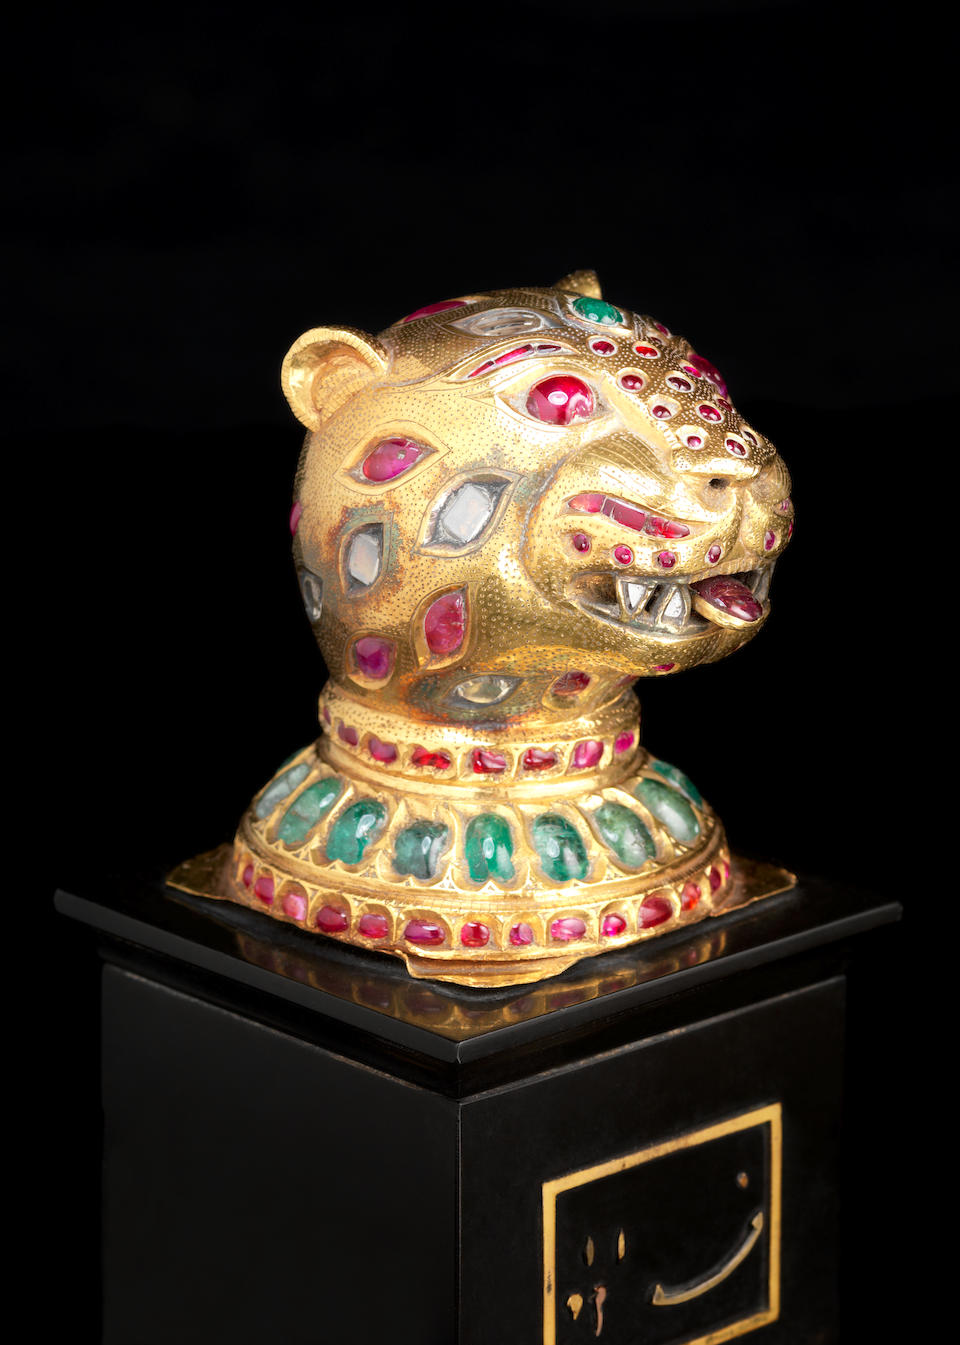 An important gem-set gold Finial in the form of a Tiger's Head from the throne of Tipu Sultan (1750-99) Mysore (Seringapatam), made between 1787-93